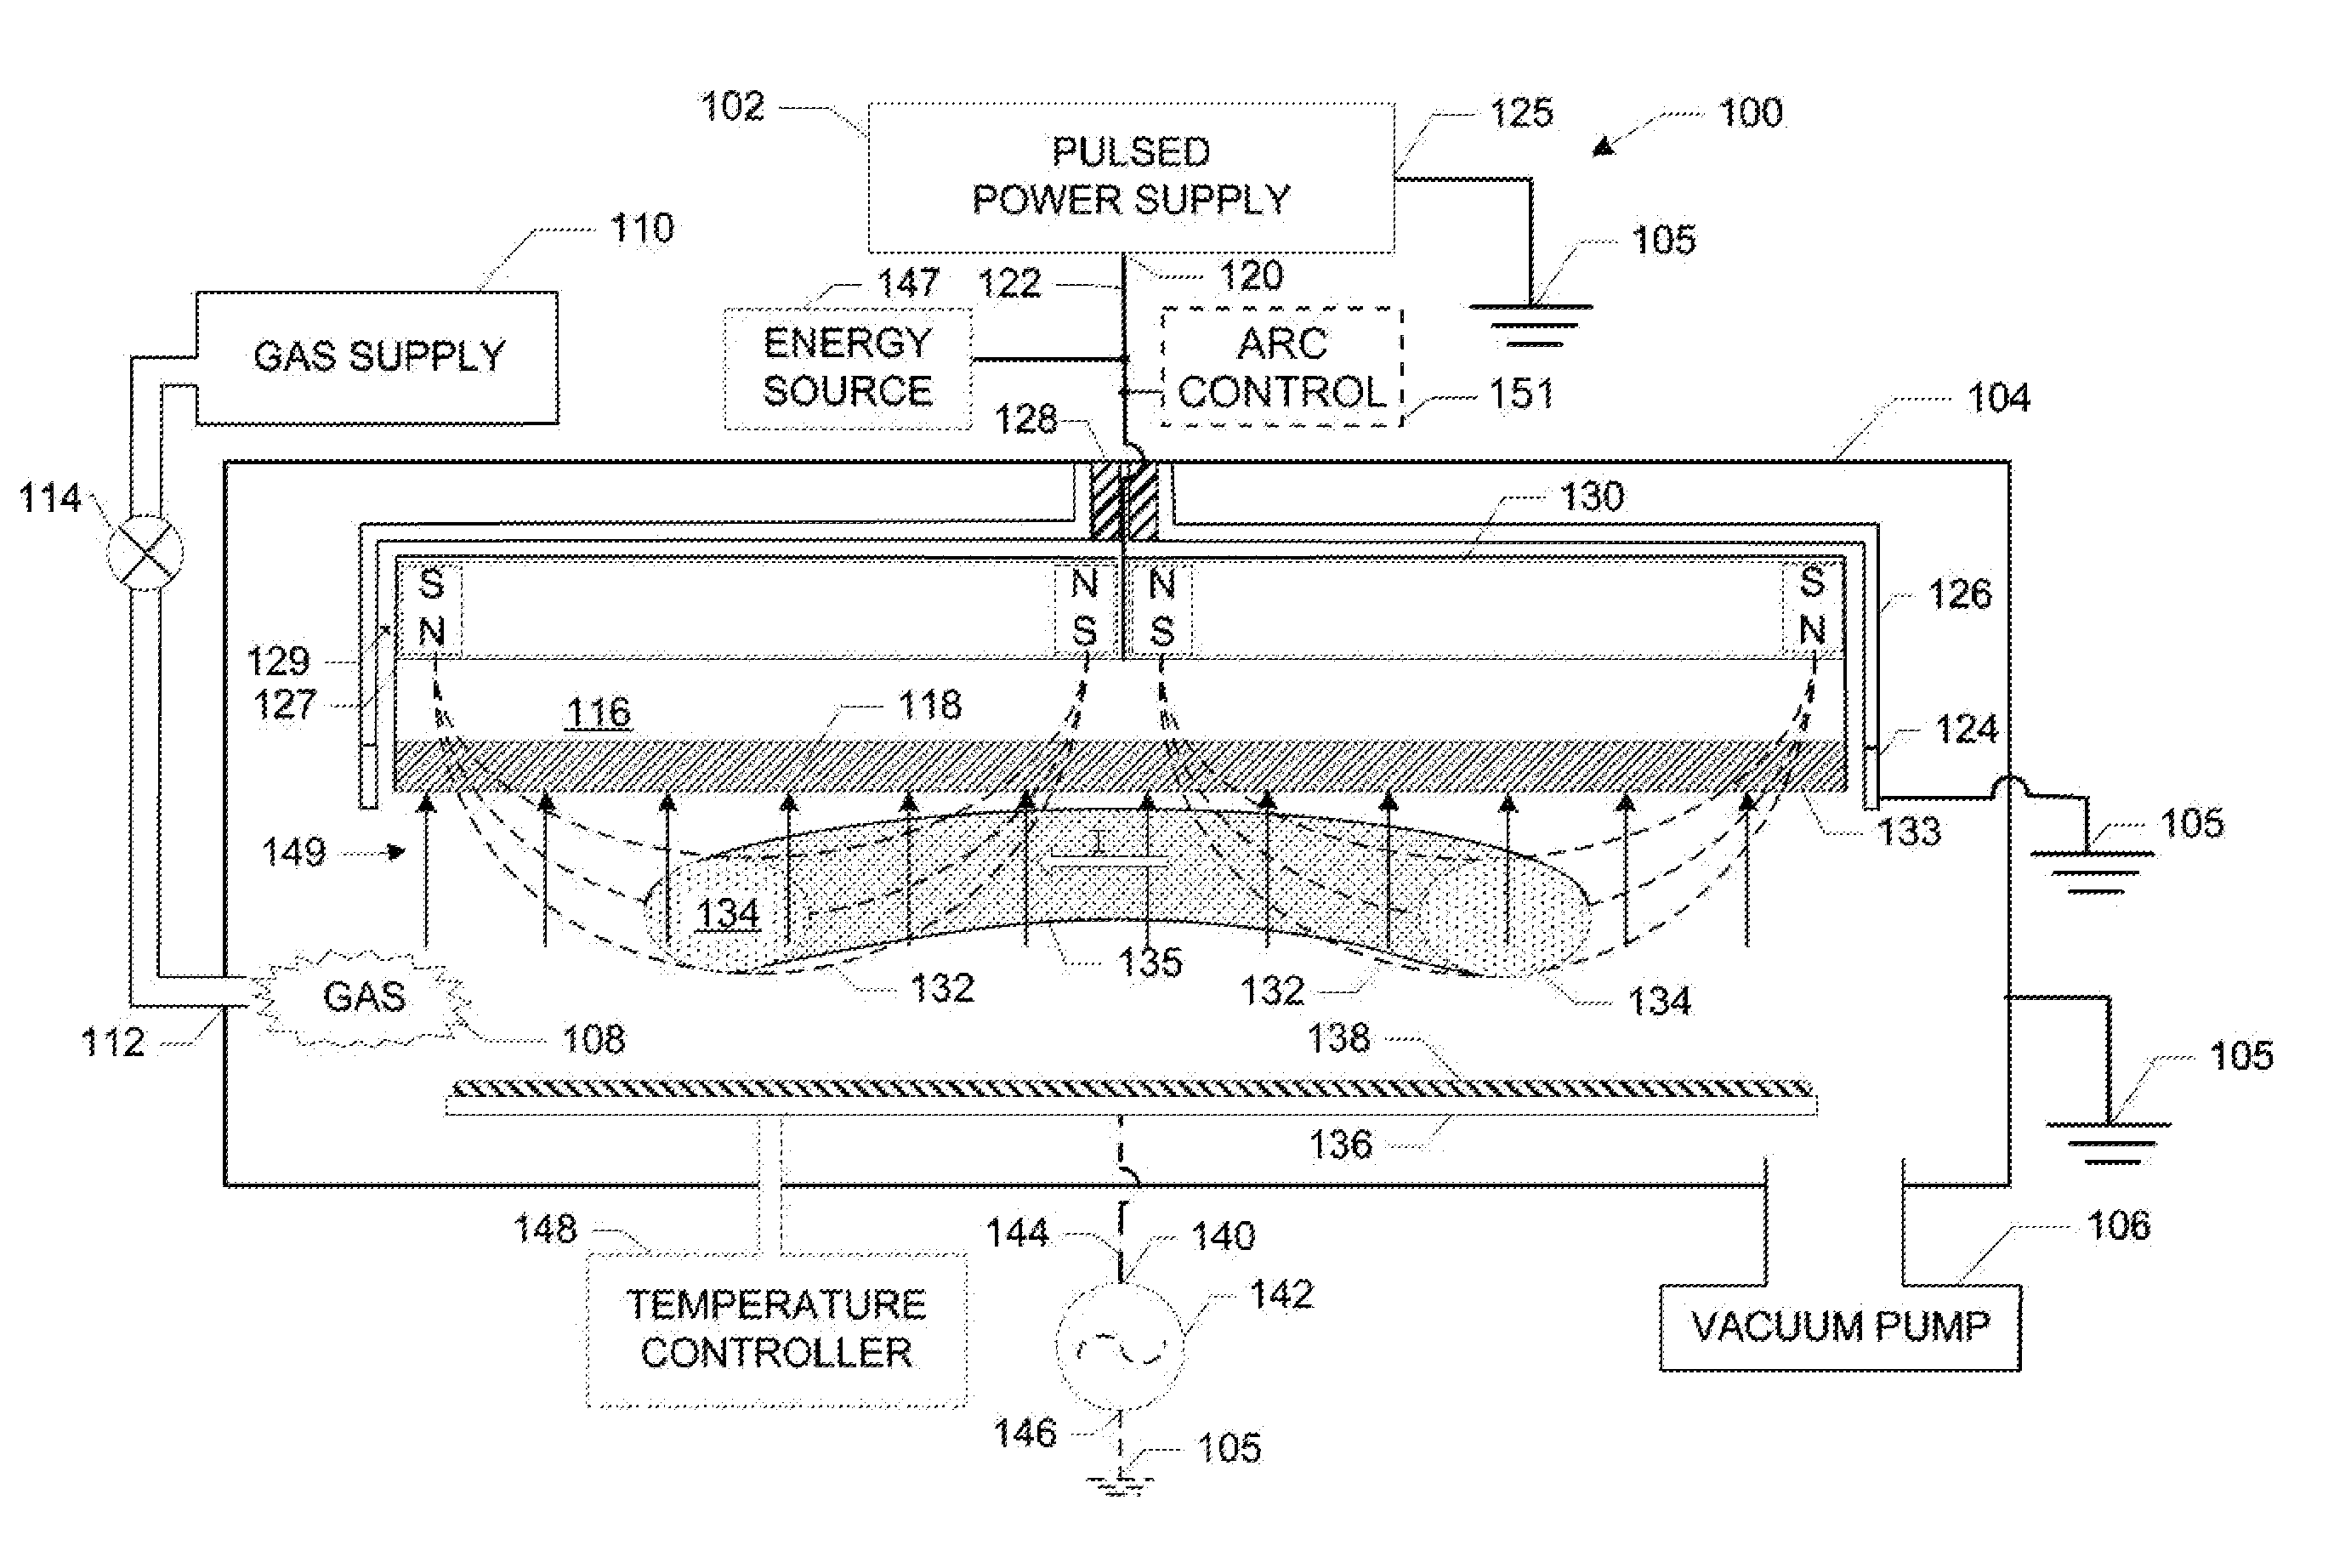 Methods And Apparatus For Generating Strongly-Ionized Plasmas With Ionizational Instabilities